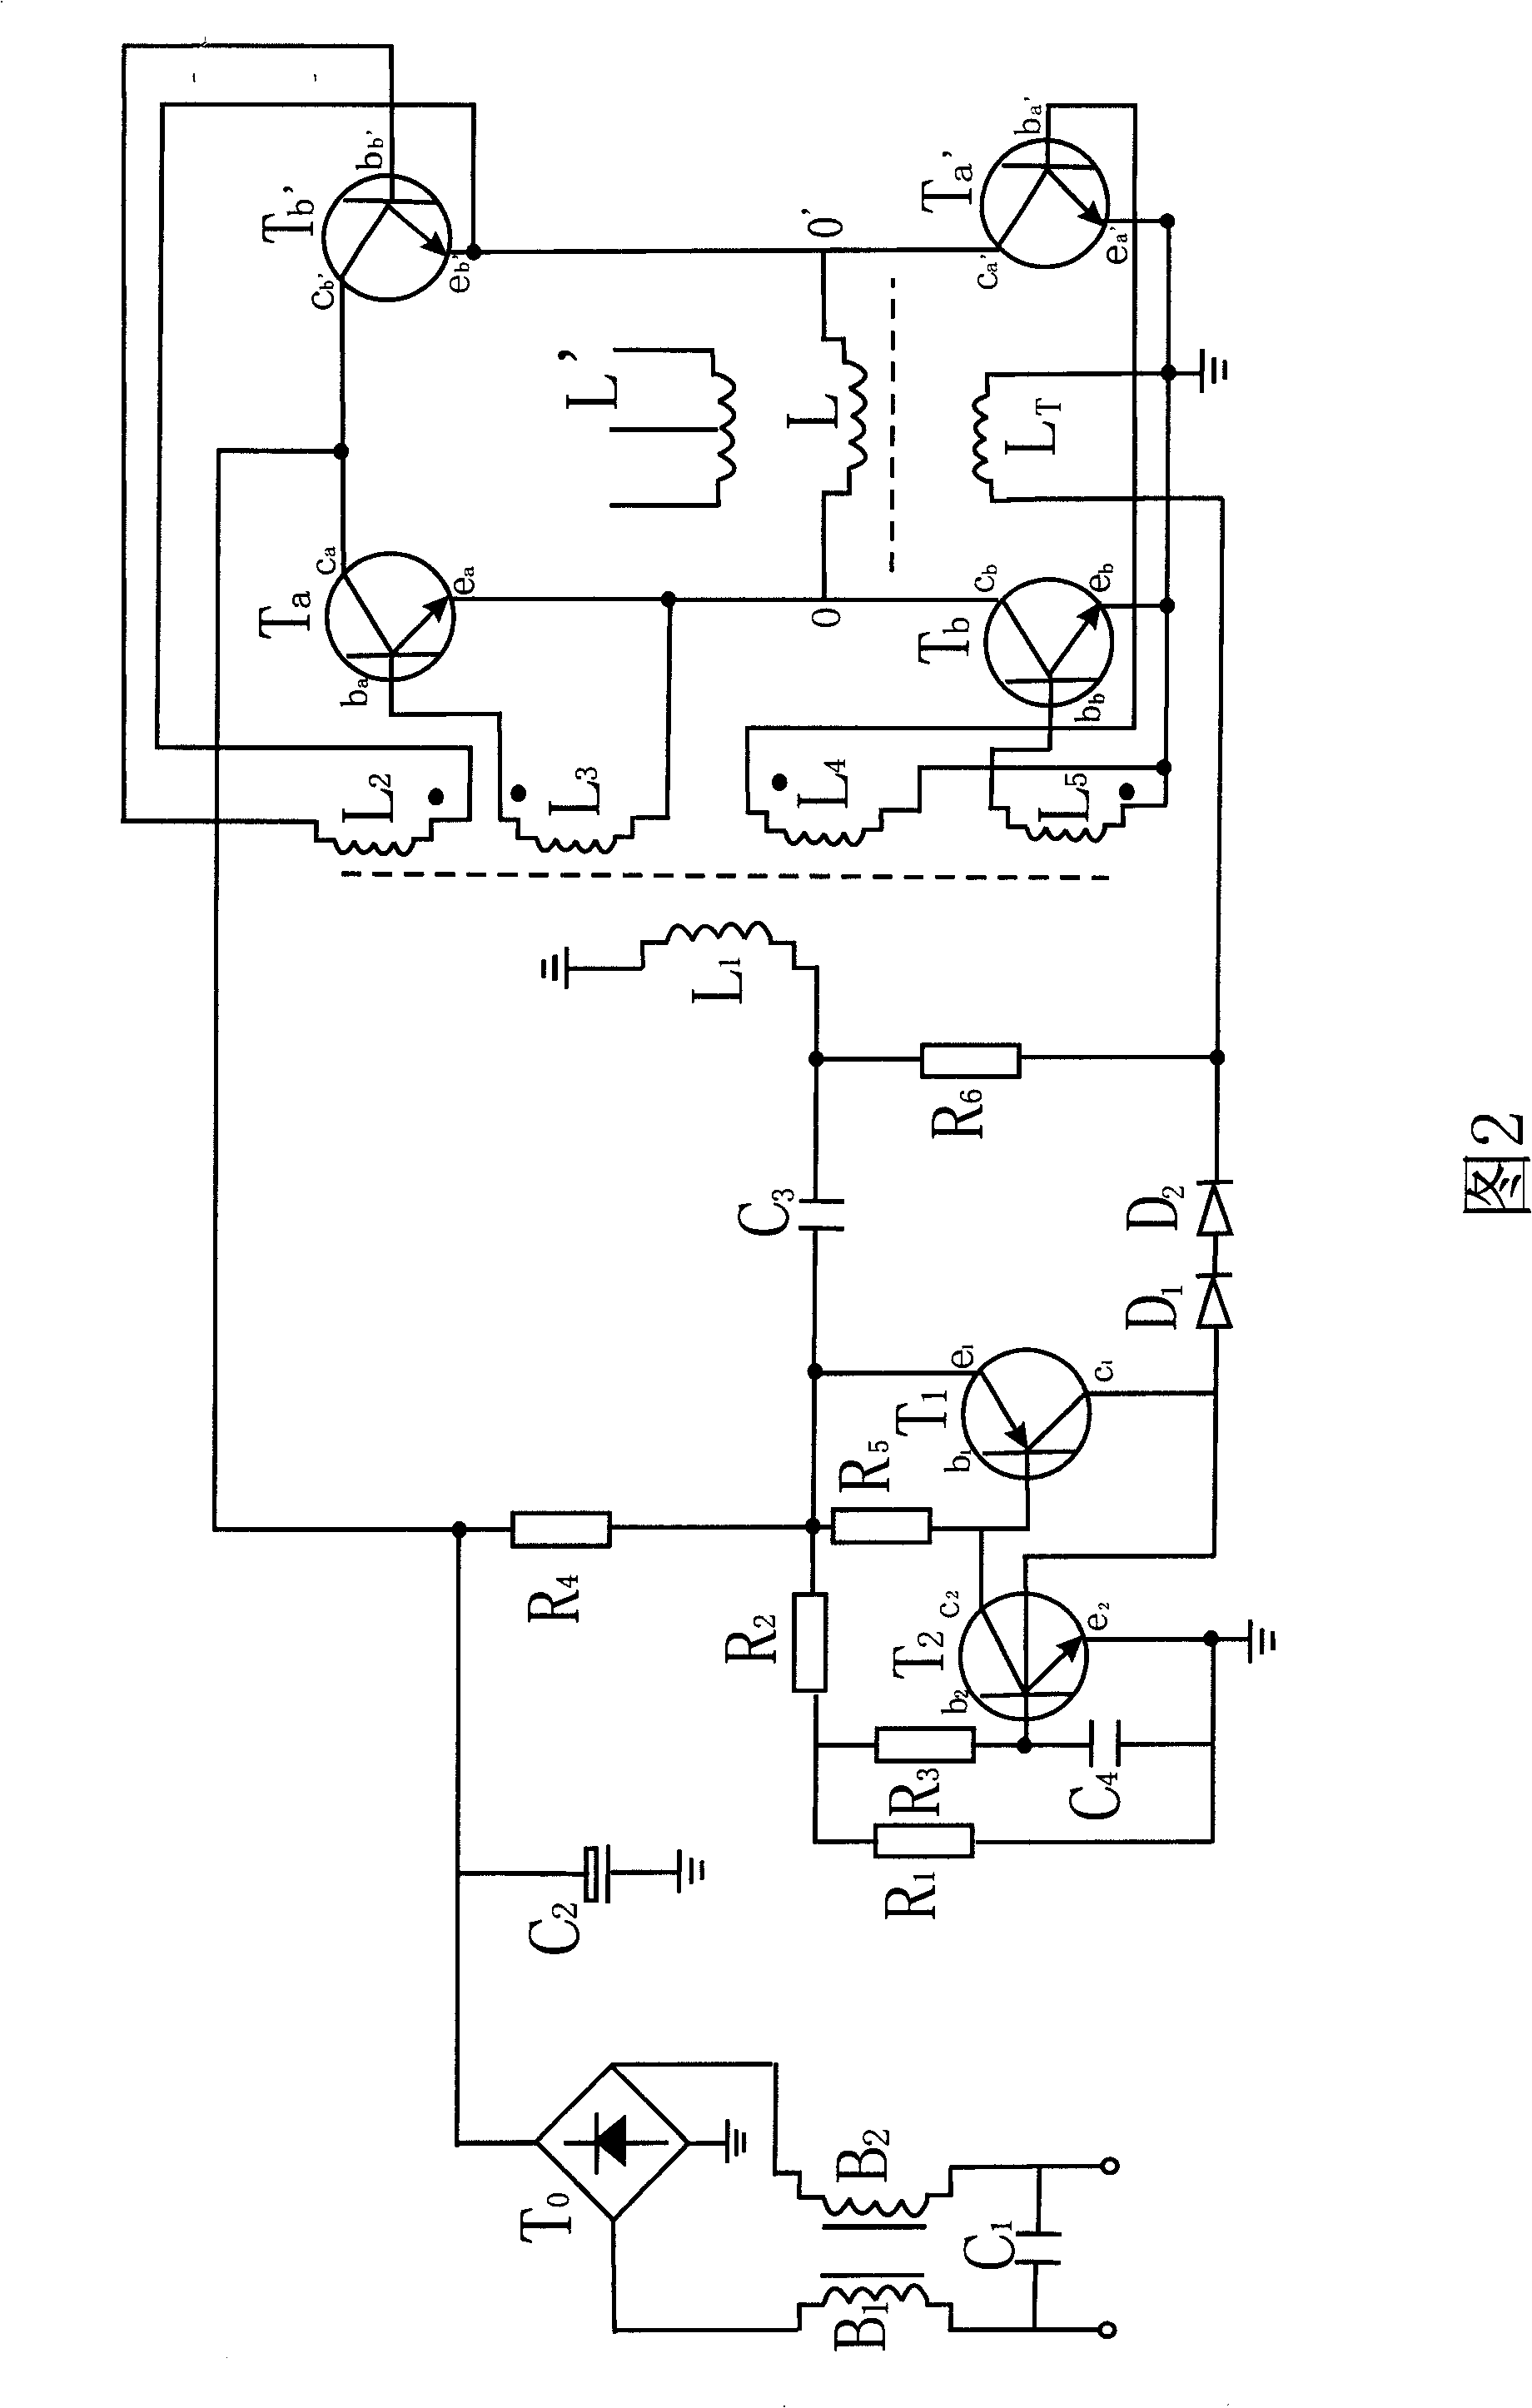 Power supply processing circuit